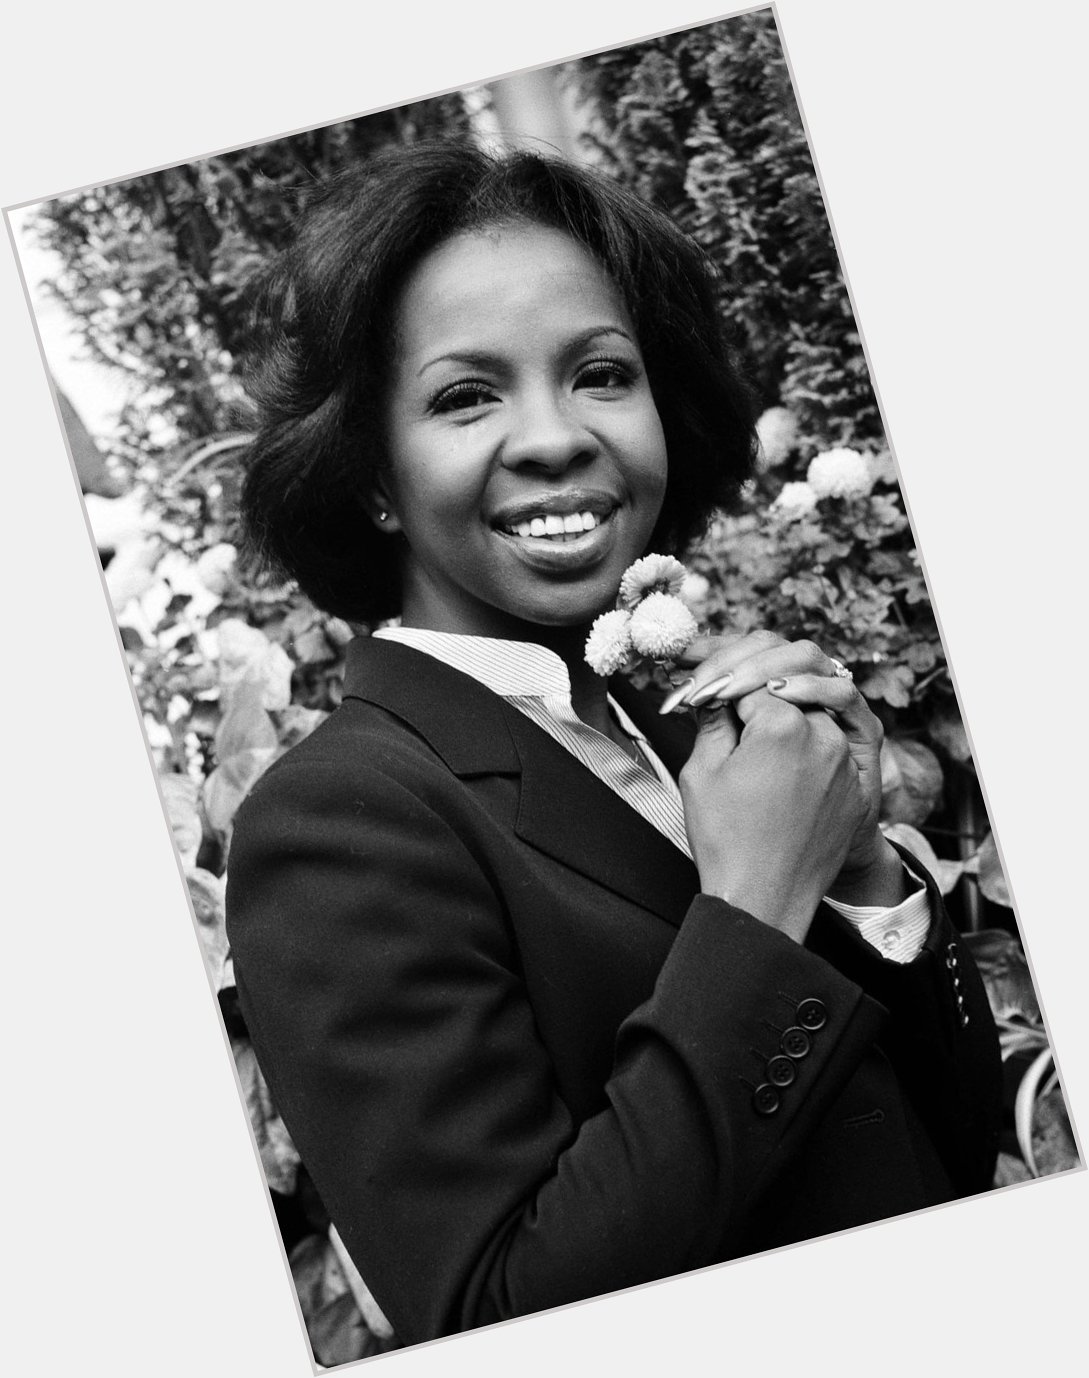 Happy birthday to the Empress of Soul, Gladys Knight - 78 today. 